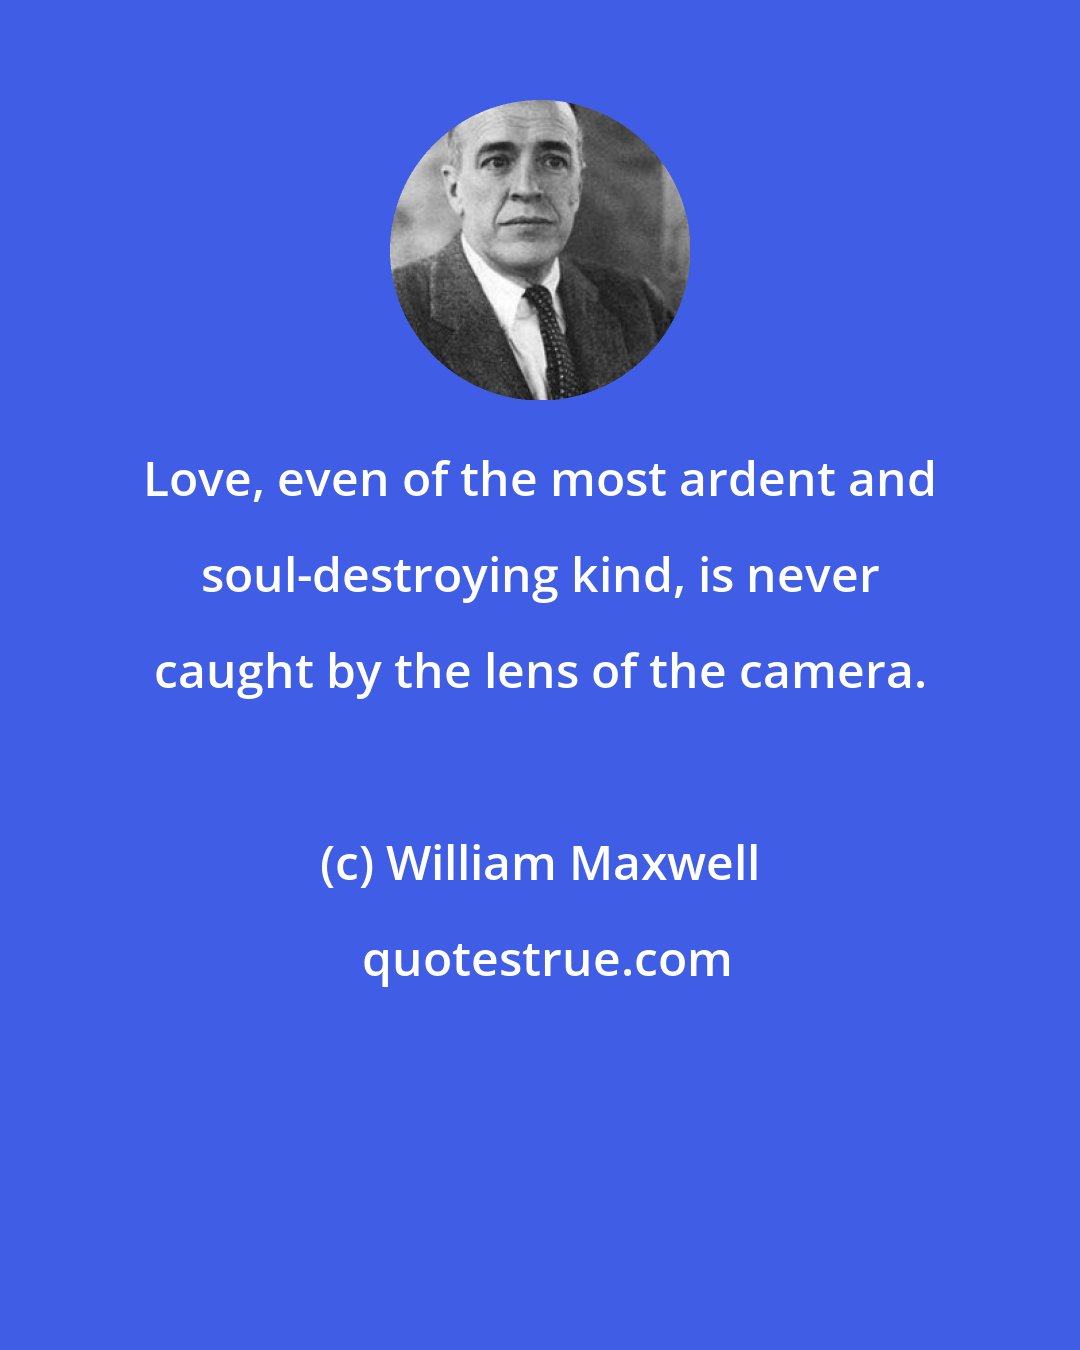 William Maxwell: Love, even of the most ardent and soul-destroying kind, is never caught by the lens of the camera.